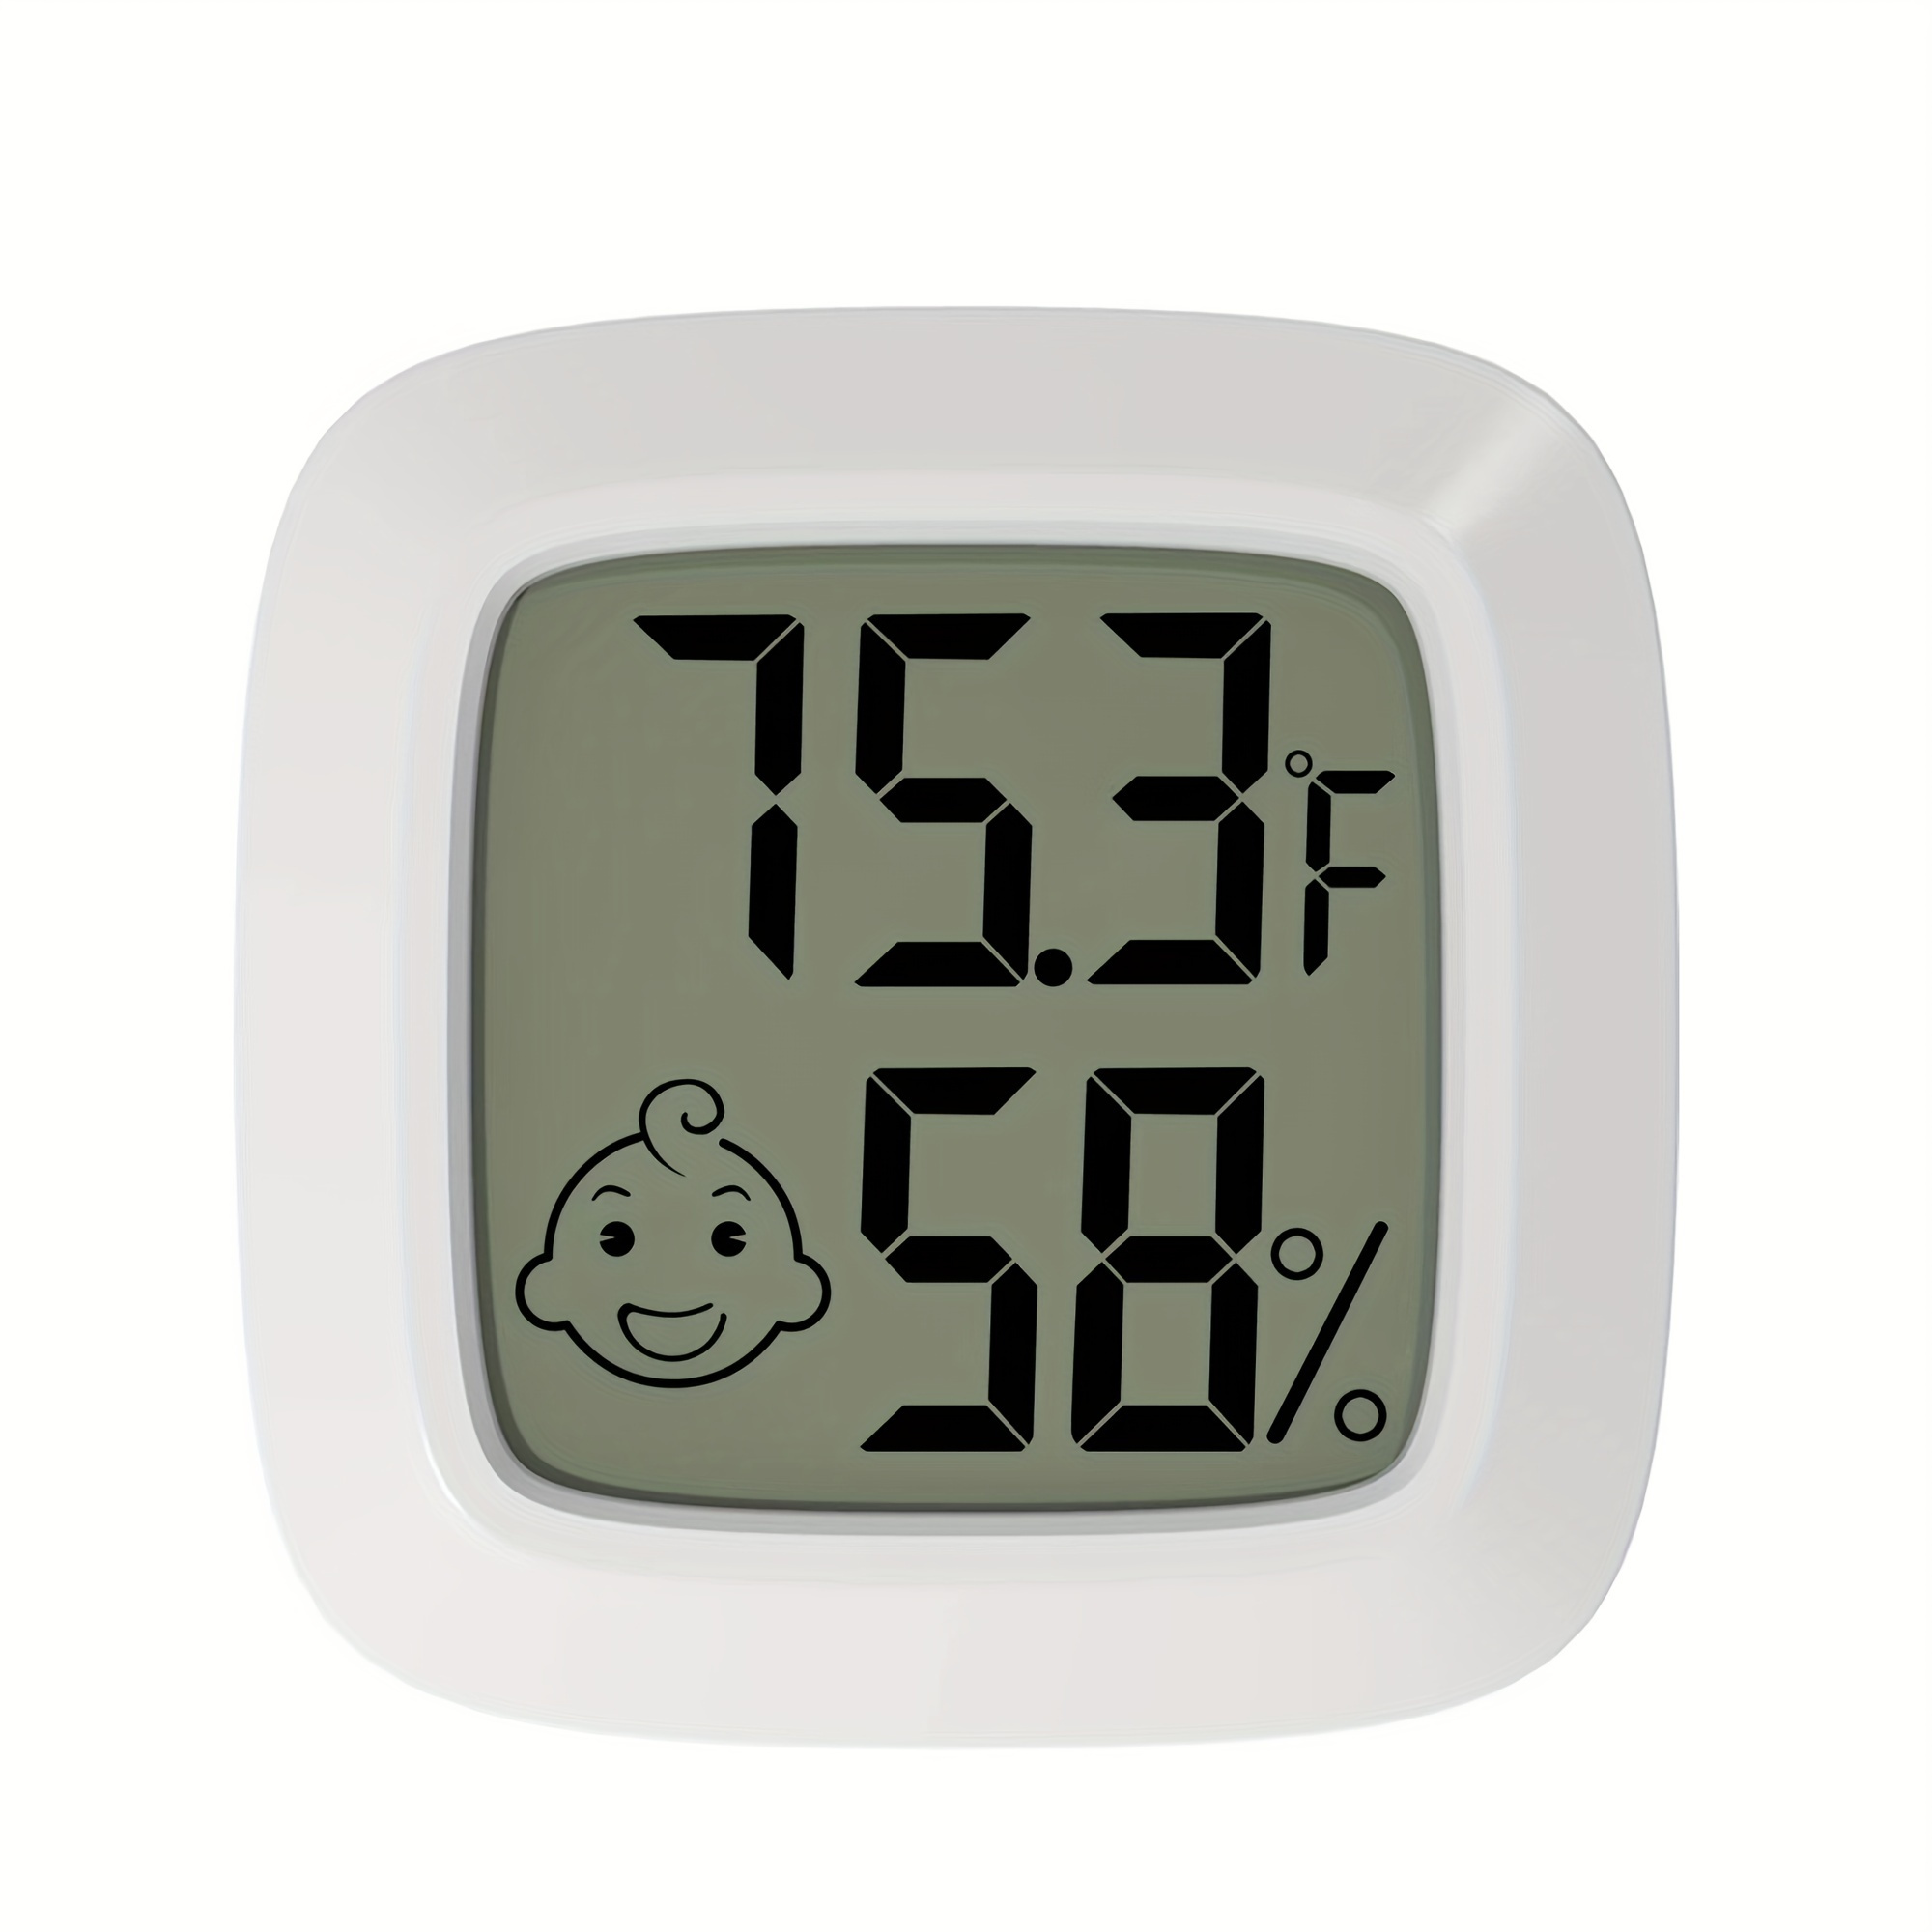 Digital Room Temperature Hygrometer With Lcd Display, Indoor Monitoring  Thermometer Hygrometer With Celsius Display, Small Thermometer And  Hygrometer, Suitable For Home, Wardrobe, Office, Toilet, Laboratory Use